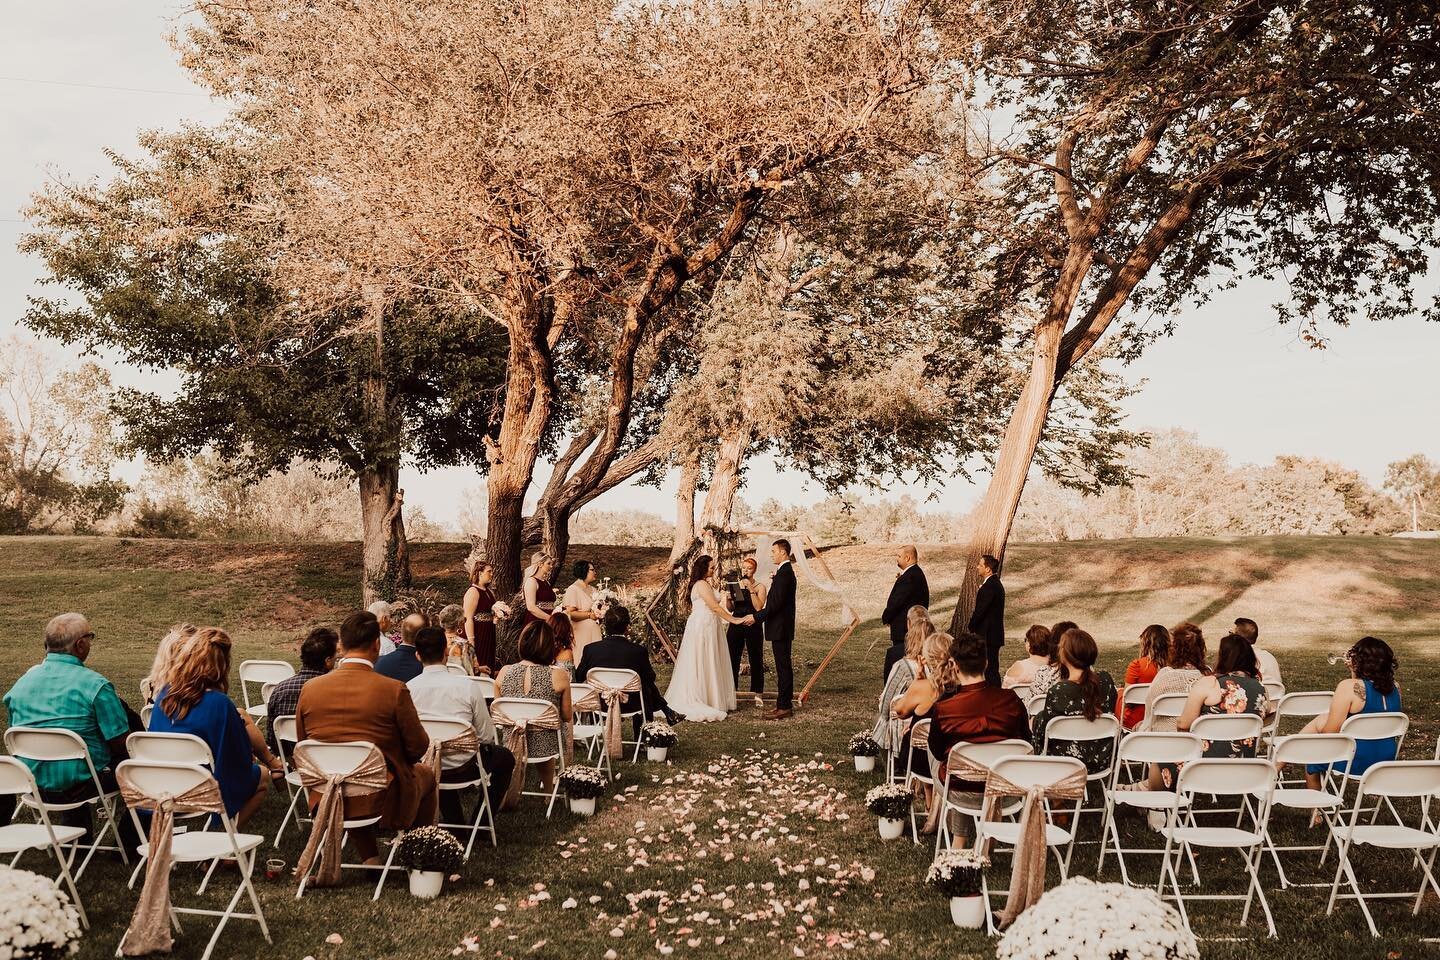 Reliving this beautiful backyard wedding from last fall. I just can&rsquo;t get over all of the perfect little details. Get married somewhere that feels meaningful to you!
.
.
.
.
 #beccalouisephotography #thekansasbride
#belovedstories
#kcweddings #